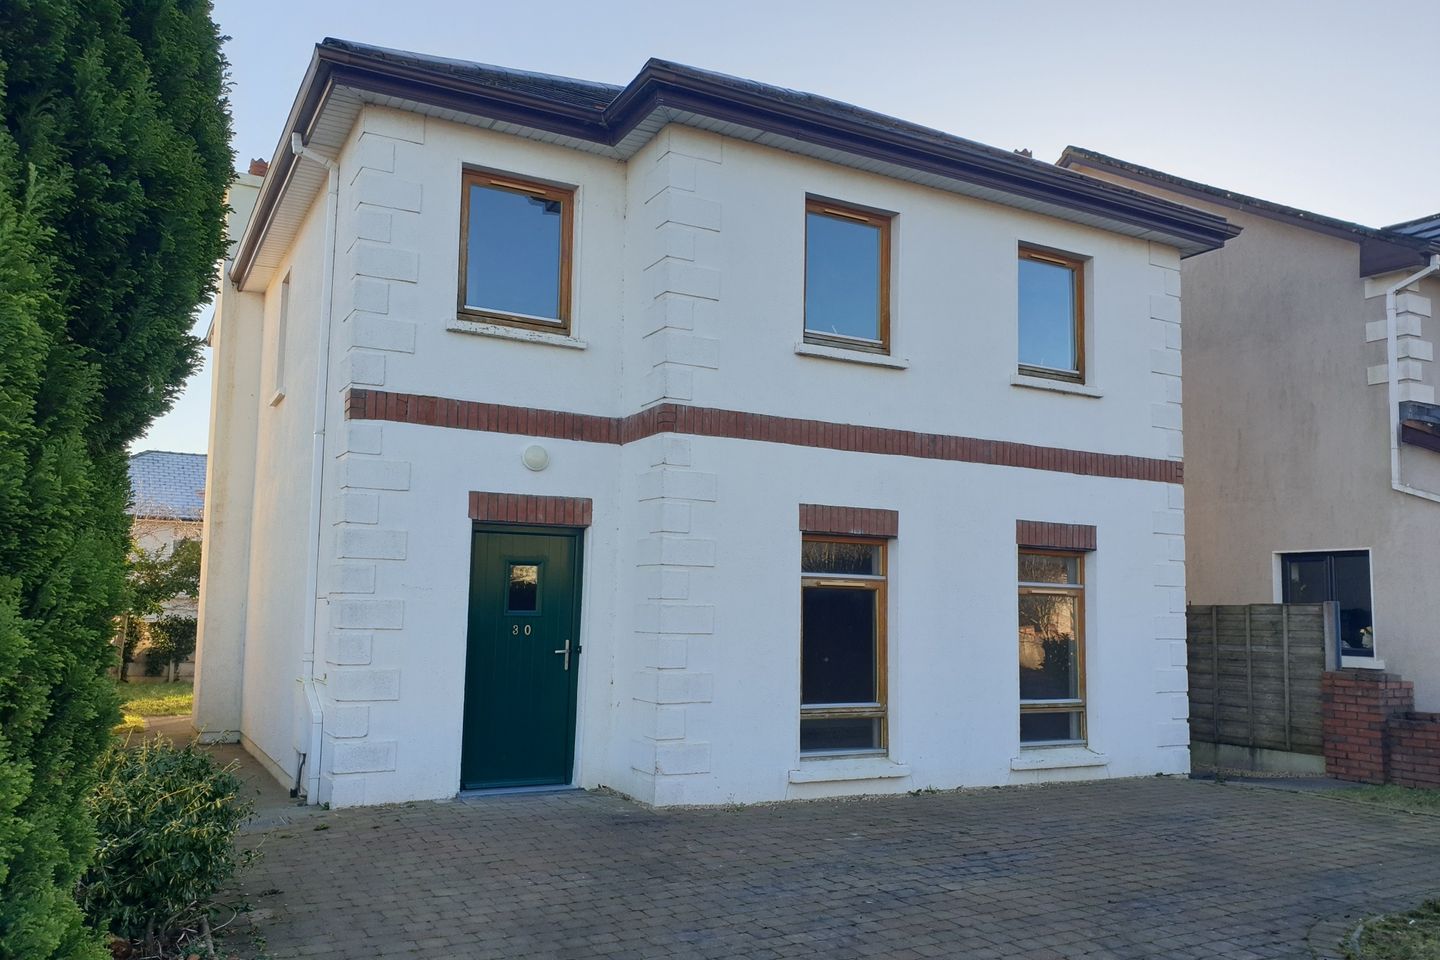 30 Abbeyville, Galway Road, Roscommon Town, Co. Roscommon, F42AK54